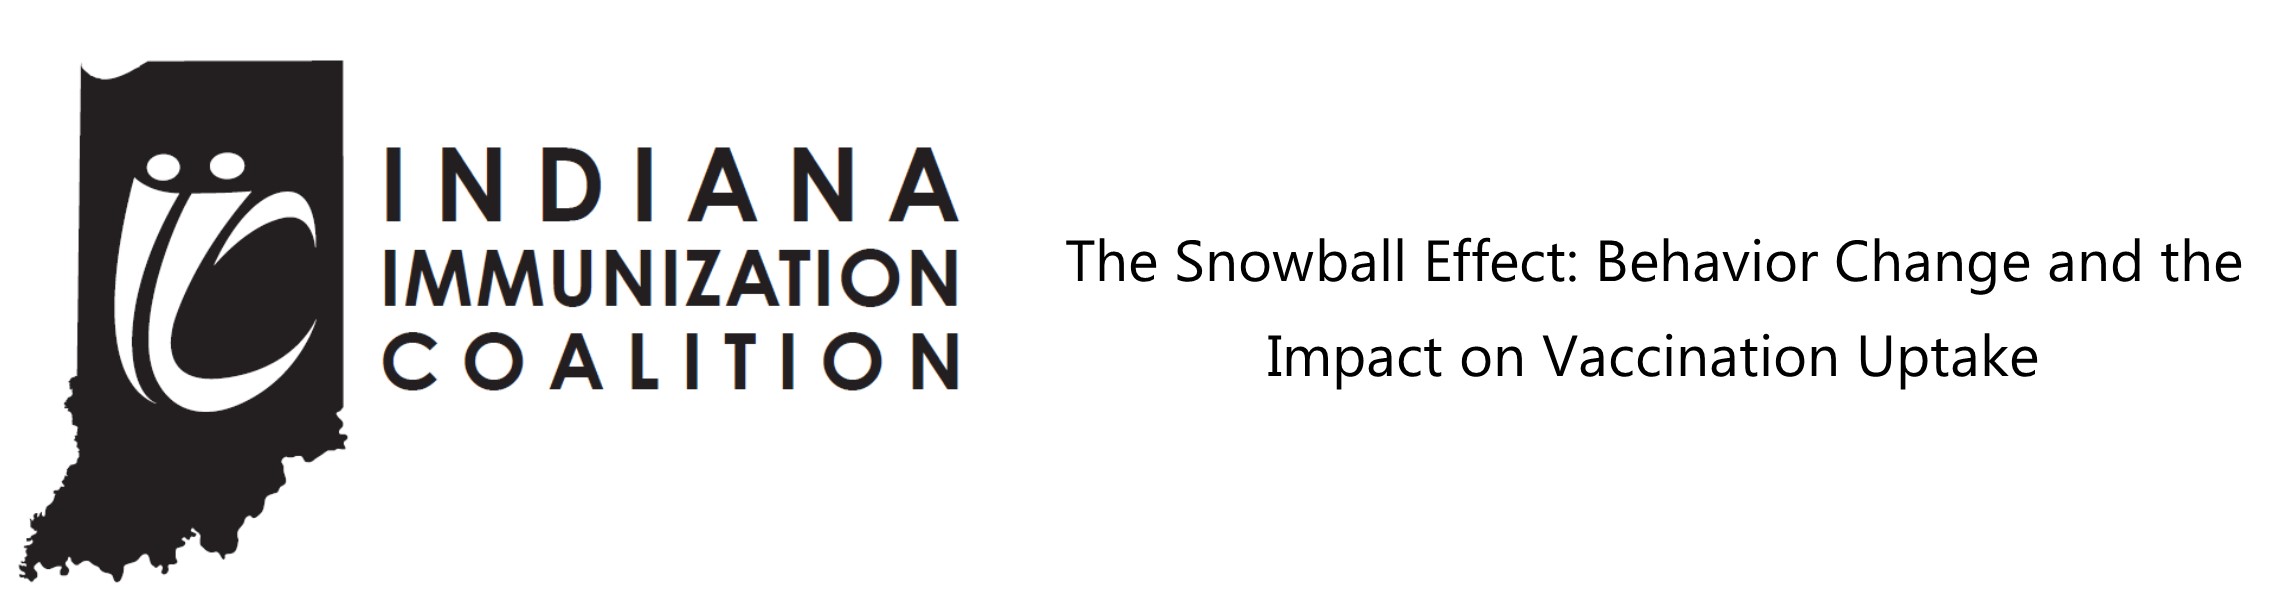 The Snowball Effect:  Behavior Change and the Impact on Vaccination Uptake Webinar Banner